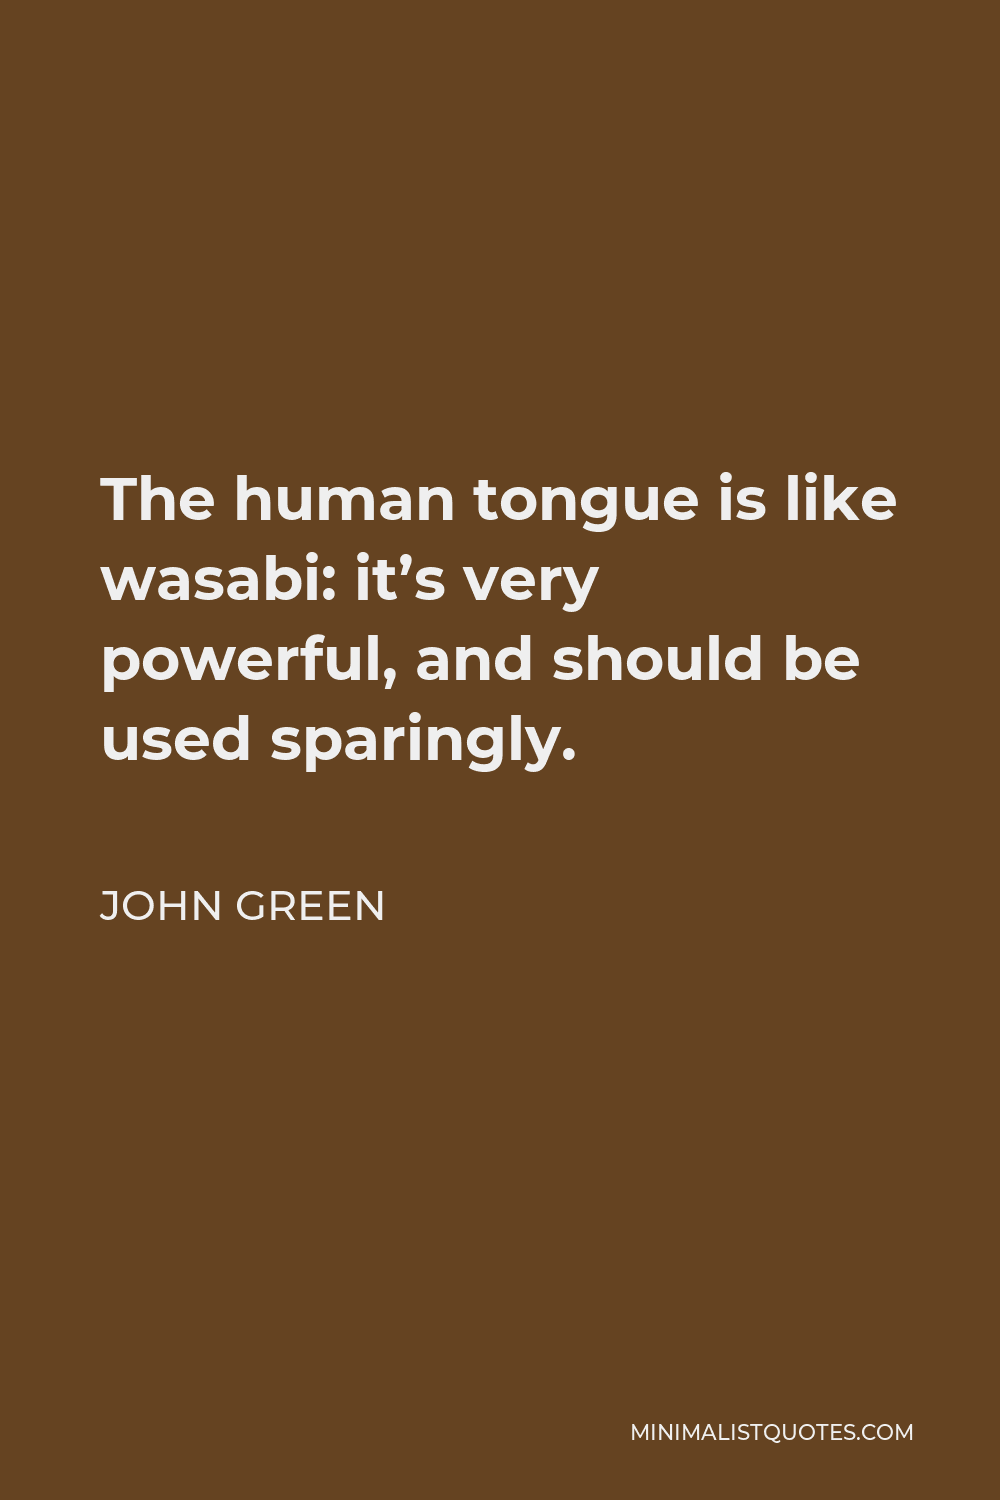 John Green Quote - The human tongue is like wasabi: it’s very powerful, and should be used sparingly.